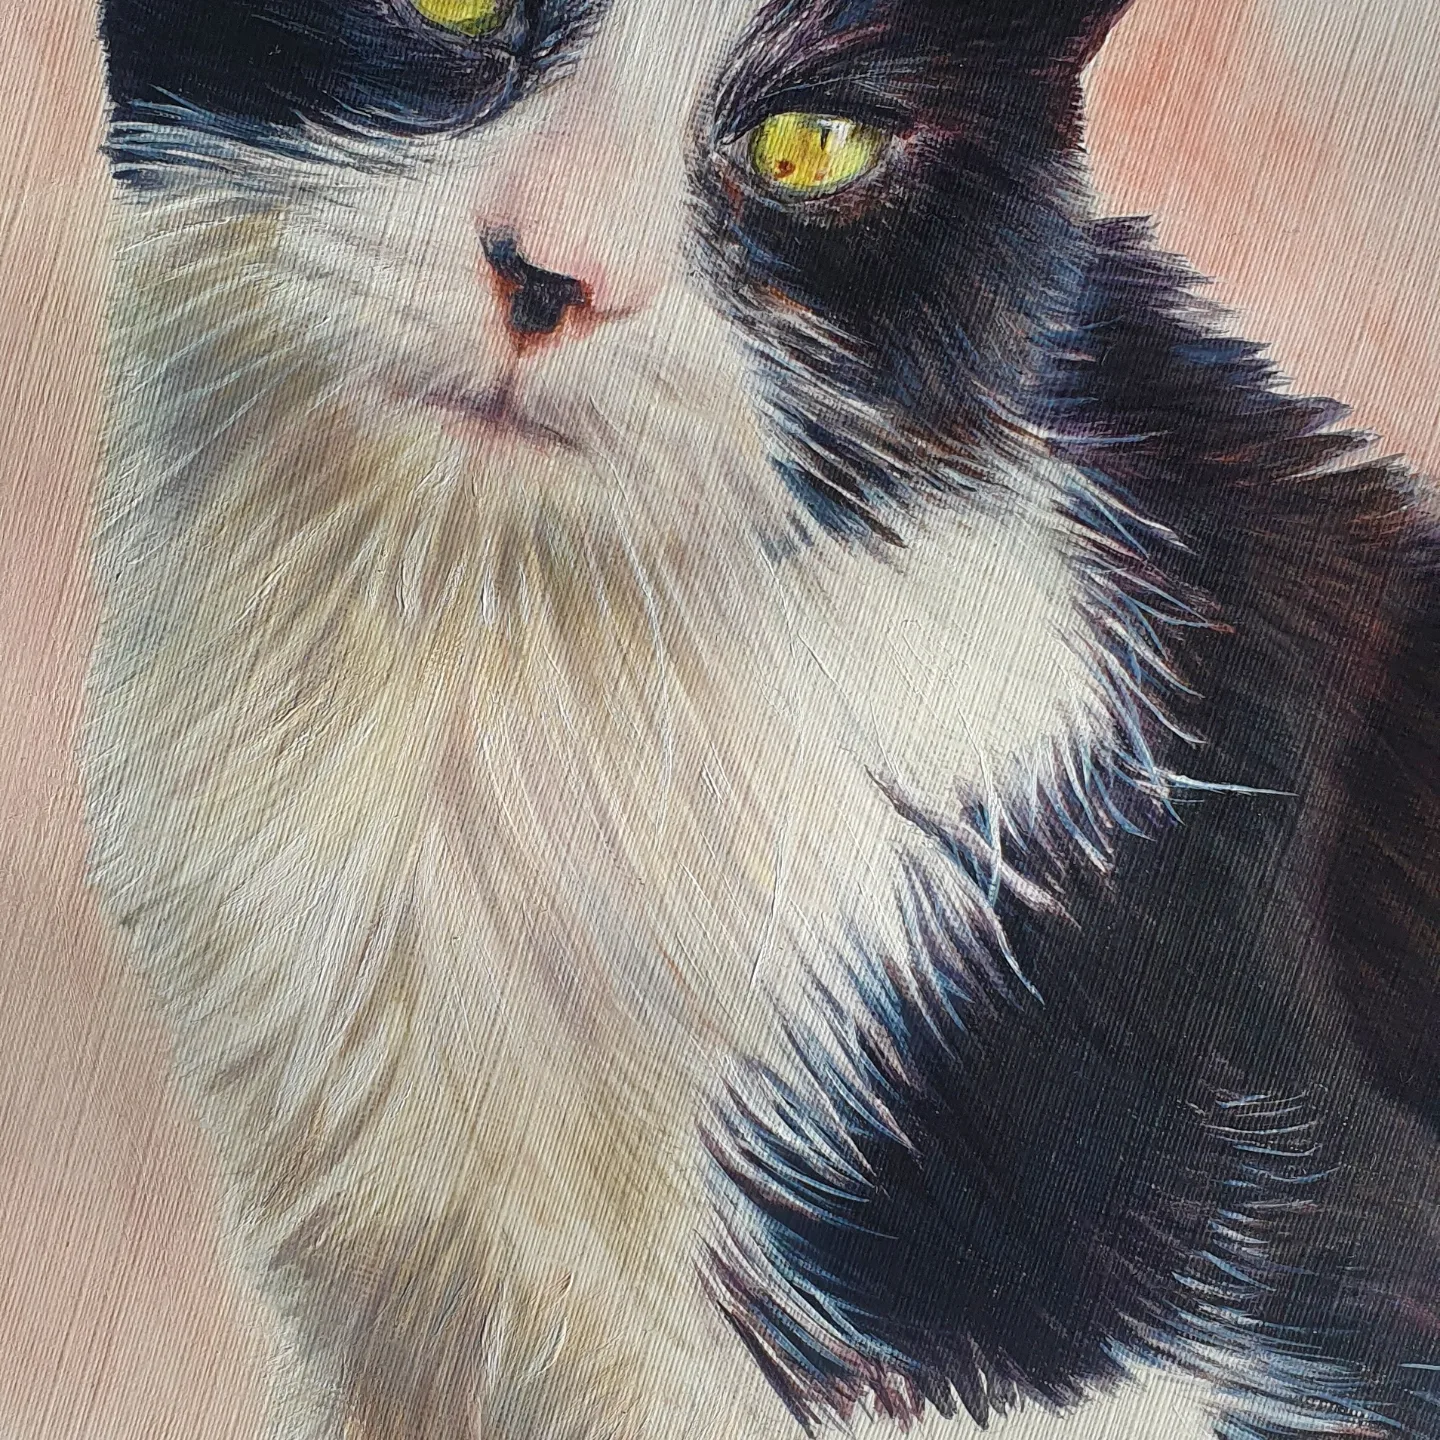 acrylic painted cat detail